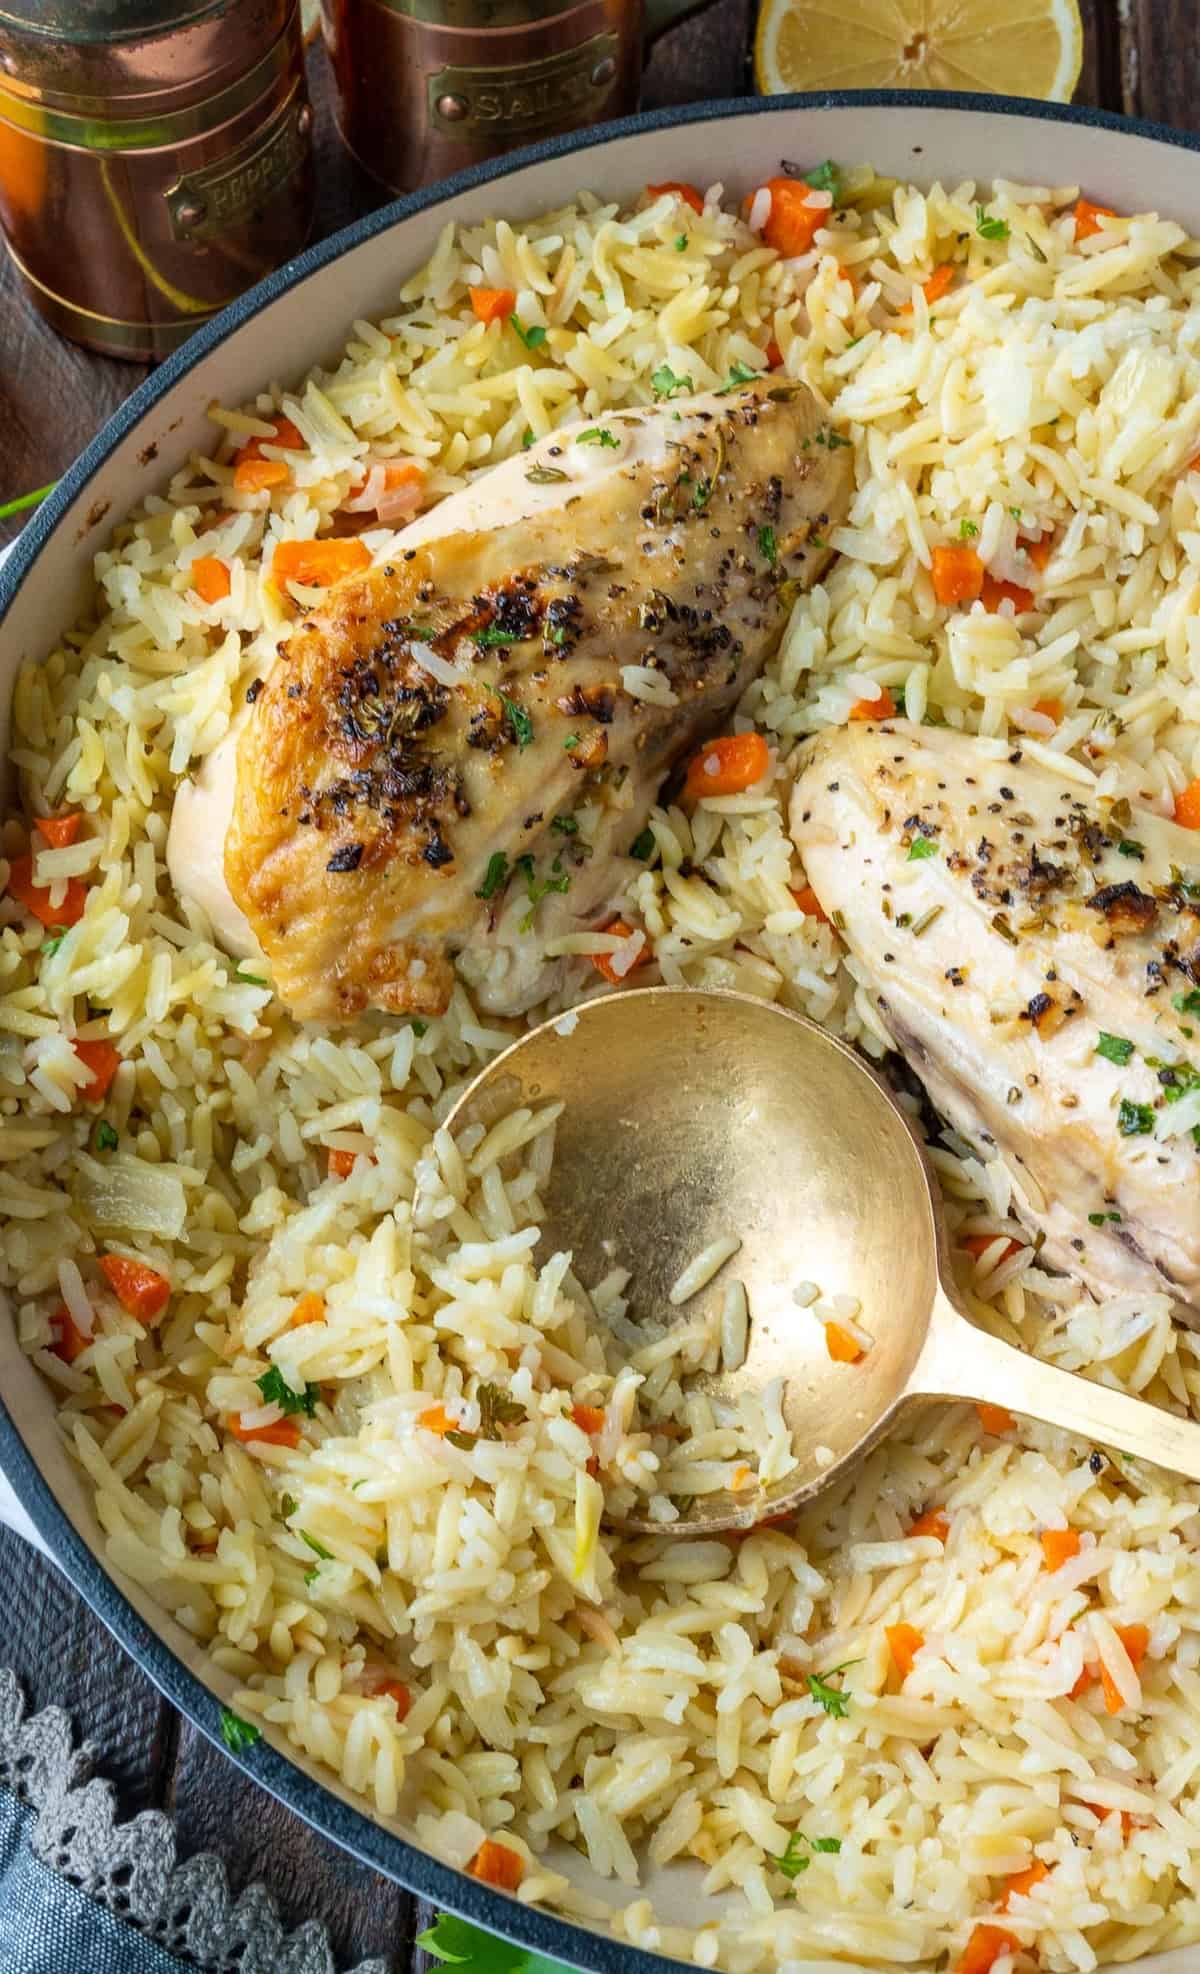 Lemon herb chicken in a skillet with rice pilaf.